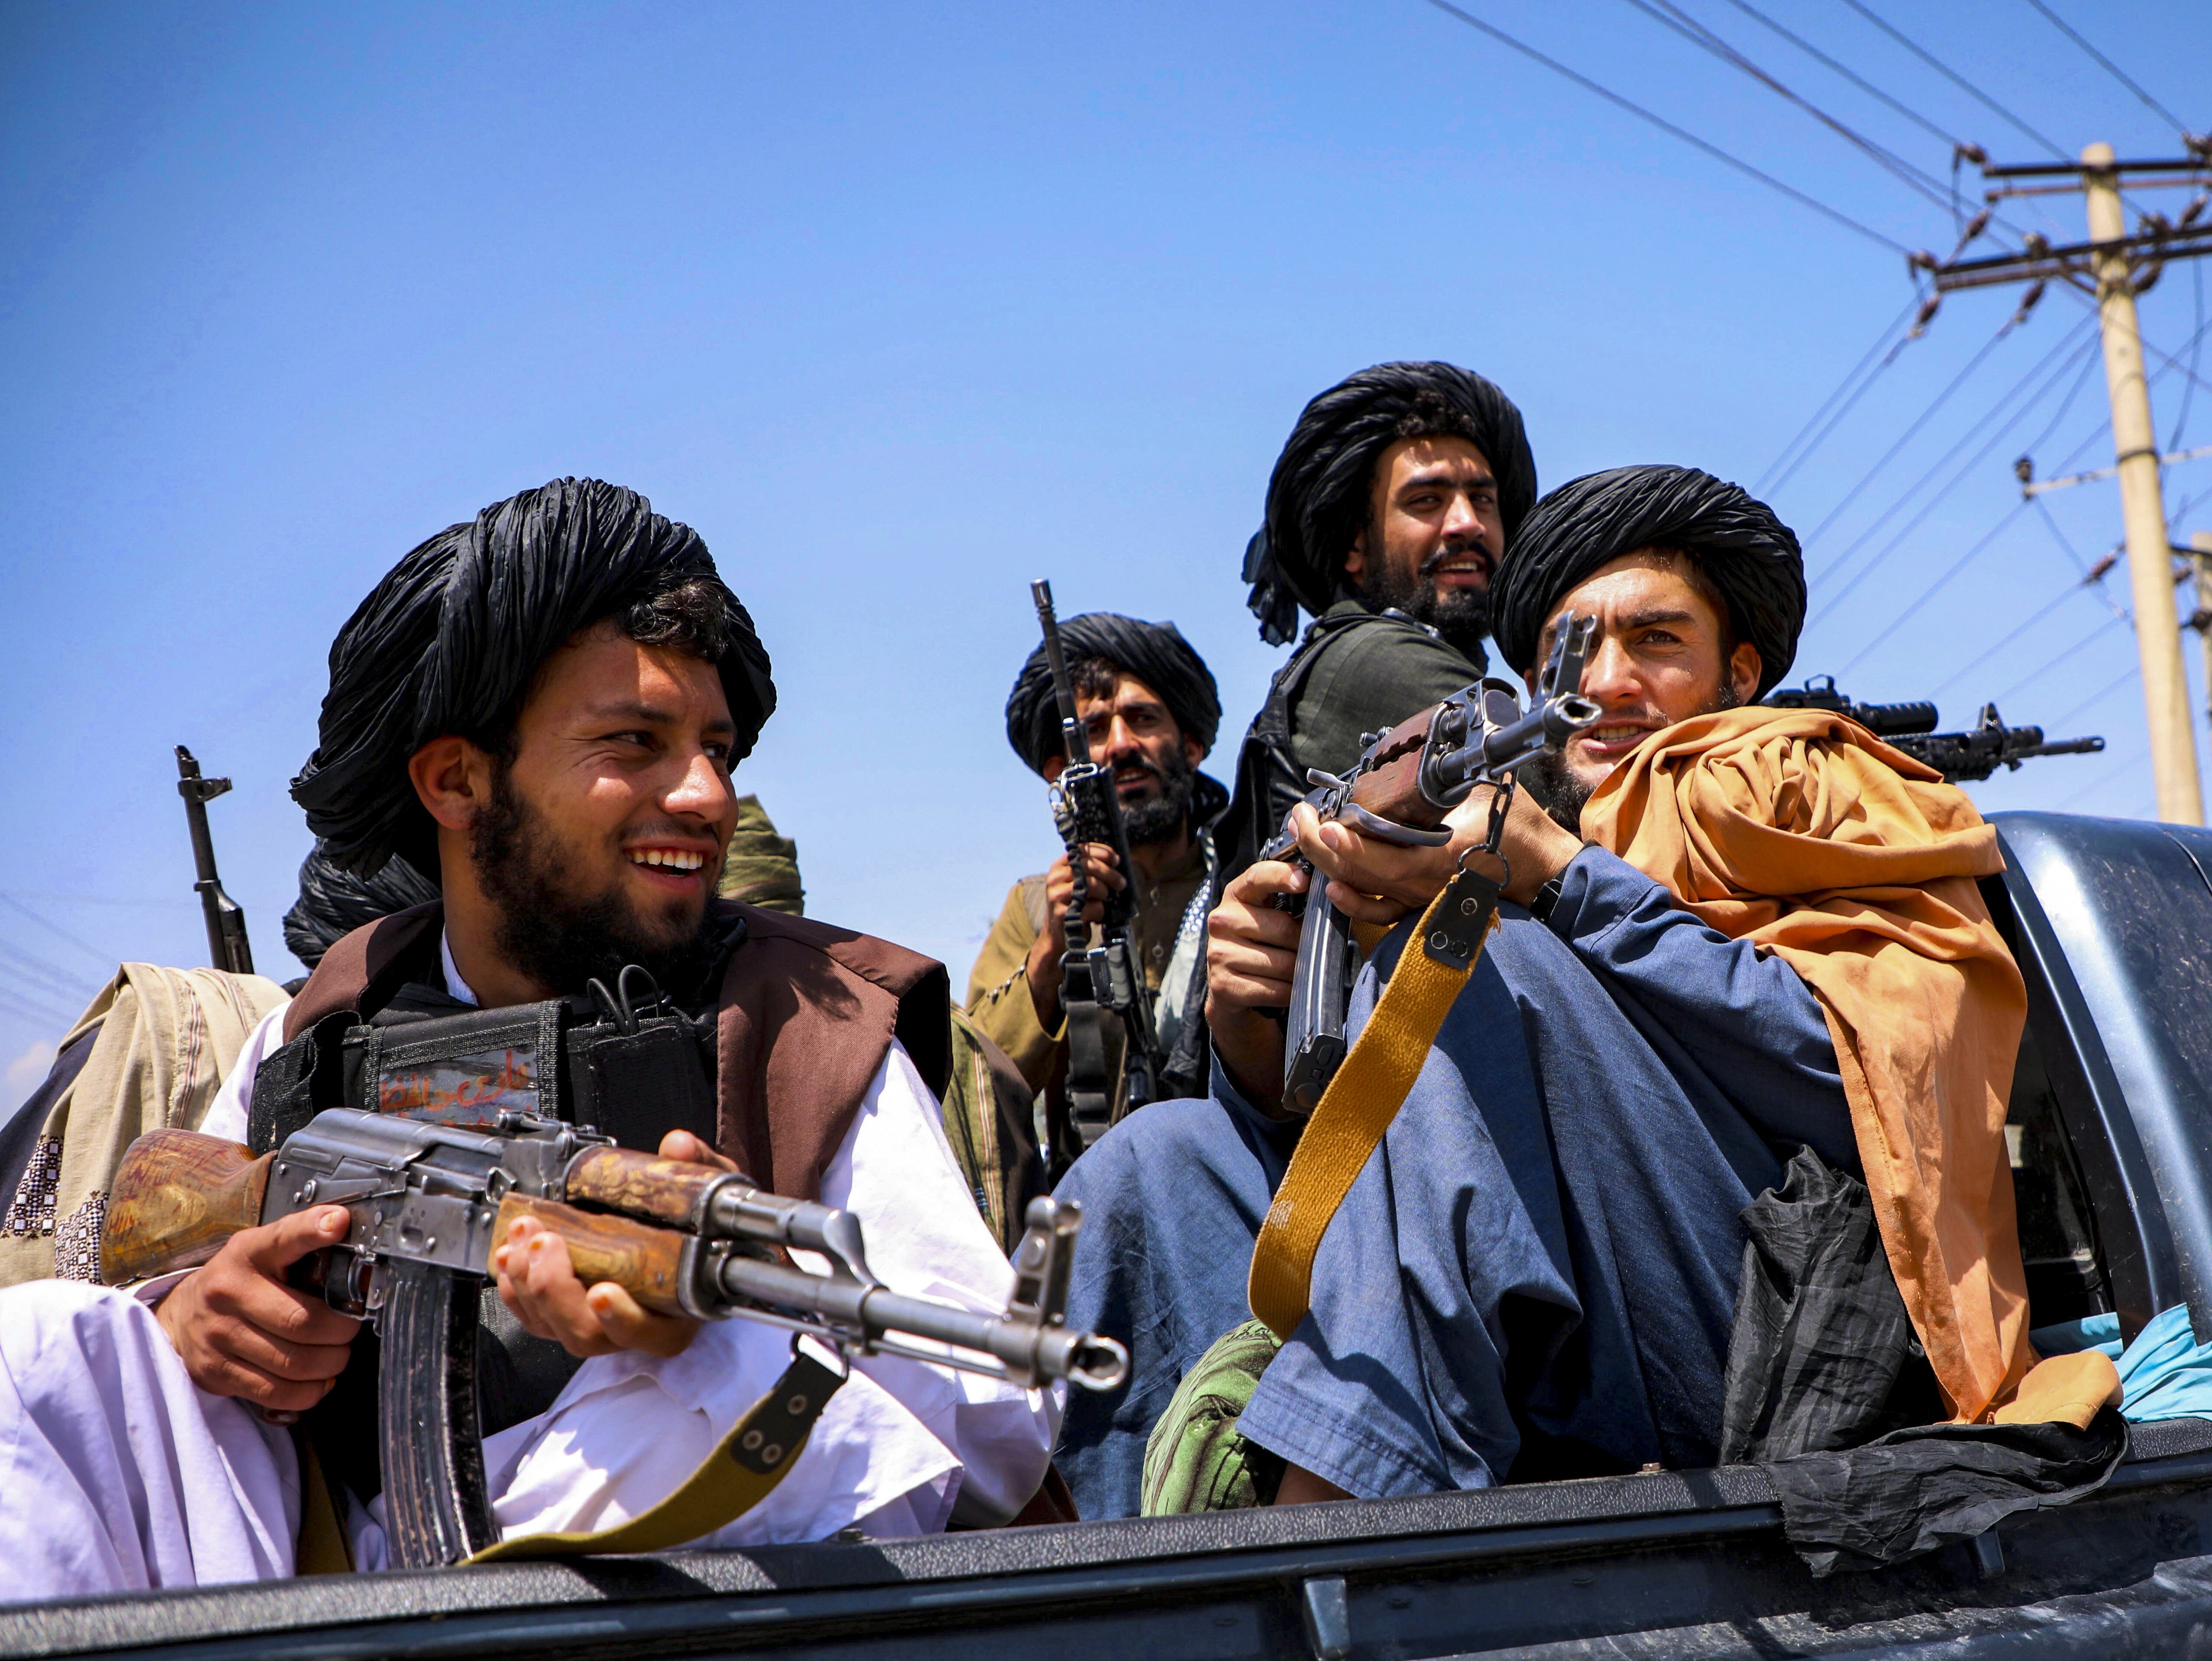 Taliban forces patrol in front of the airport in Kabul, Afghanistan, on Thursday. The situation has moved many in Hong Kong to raise funds for refugees and others affected by the crisis. Photo: Reuters